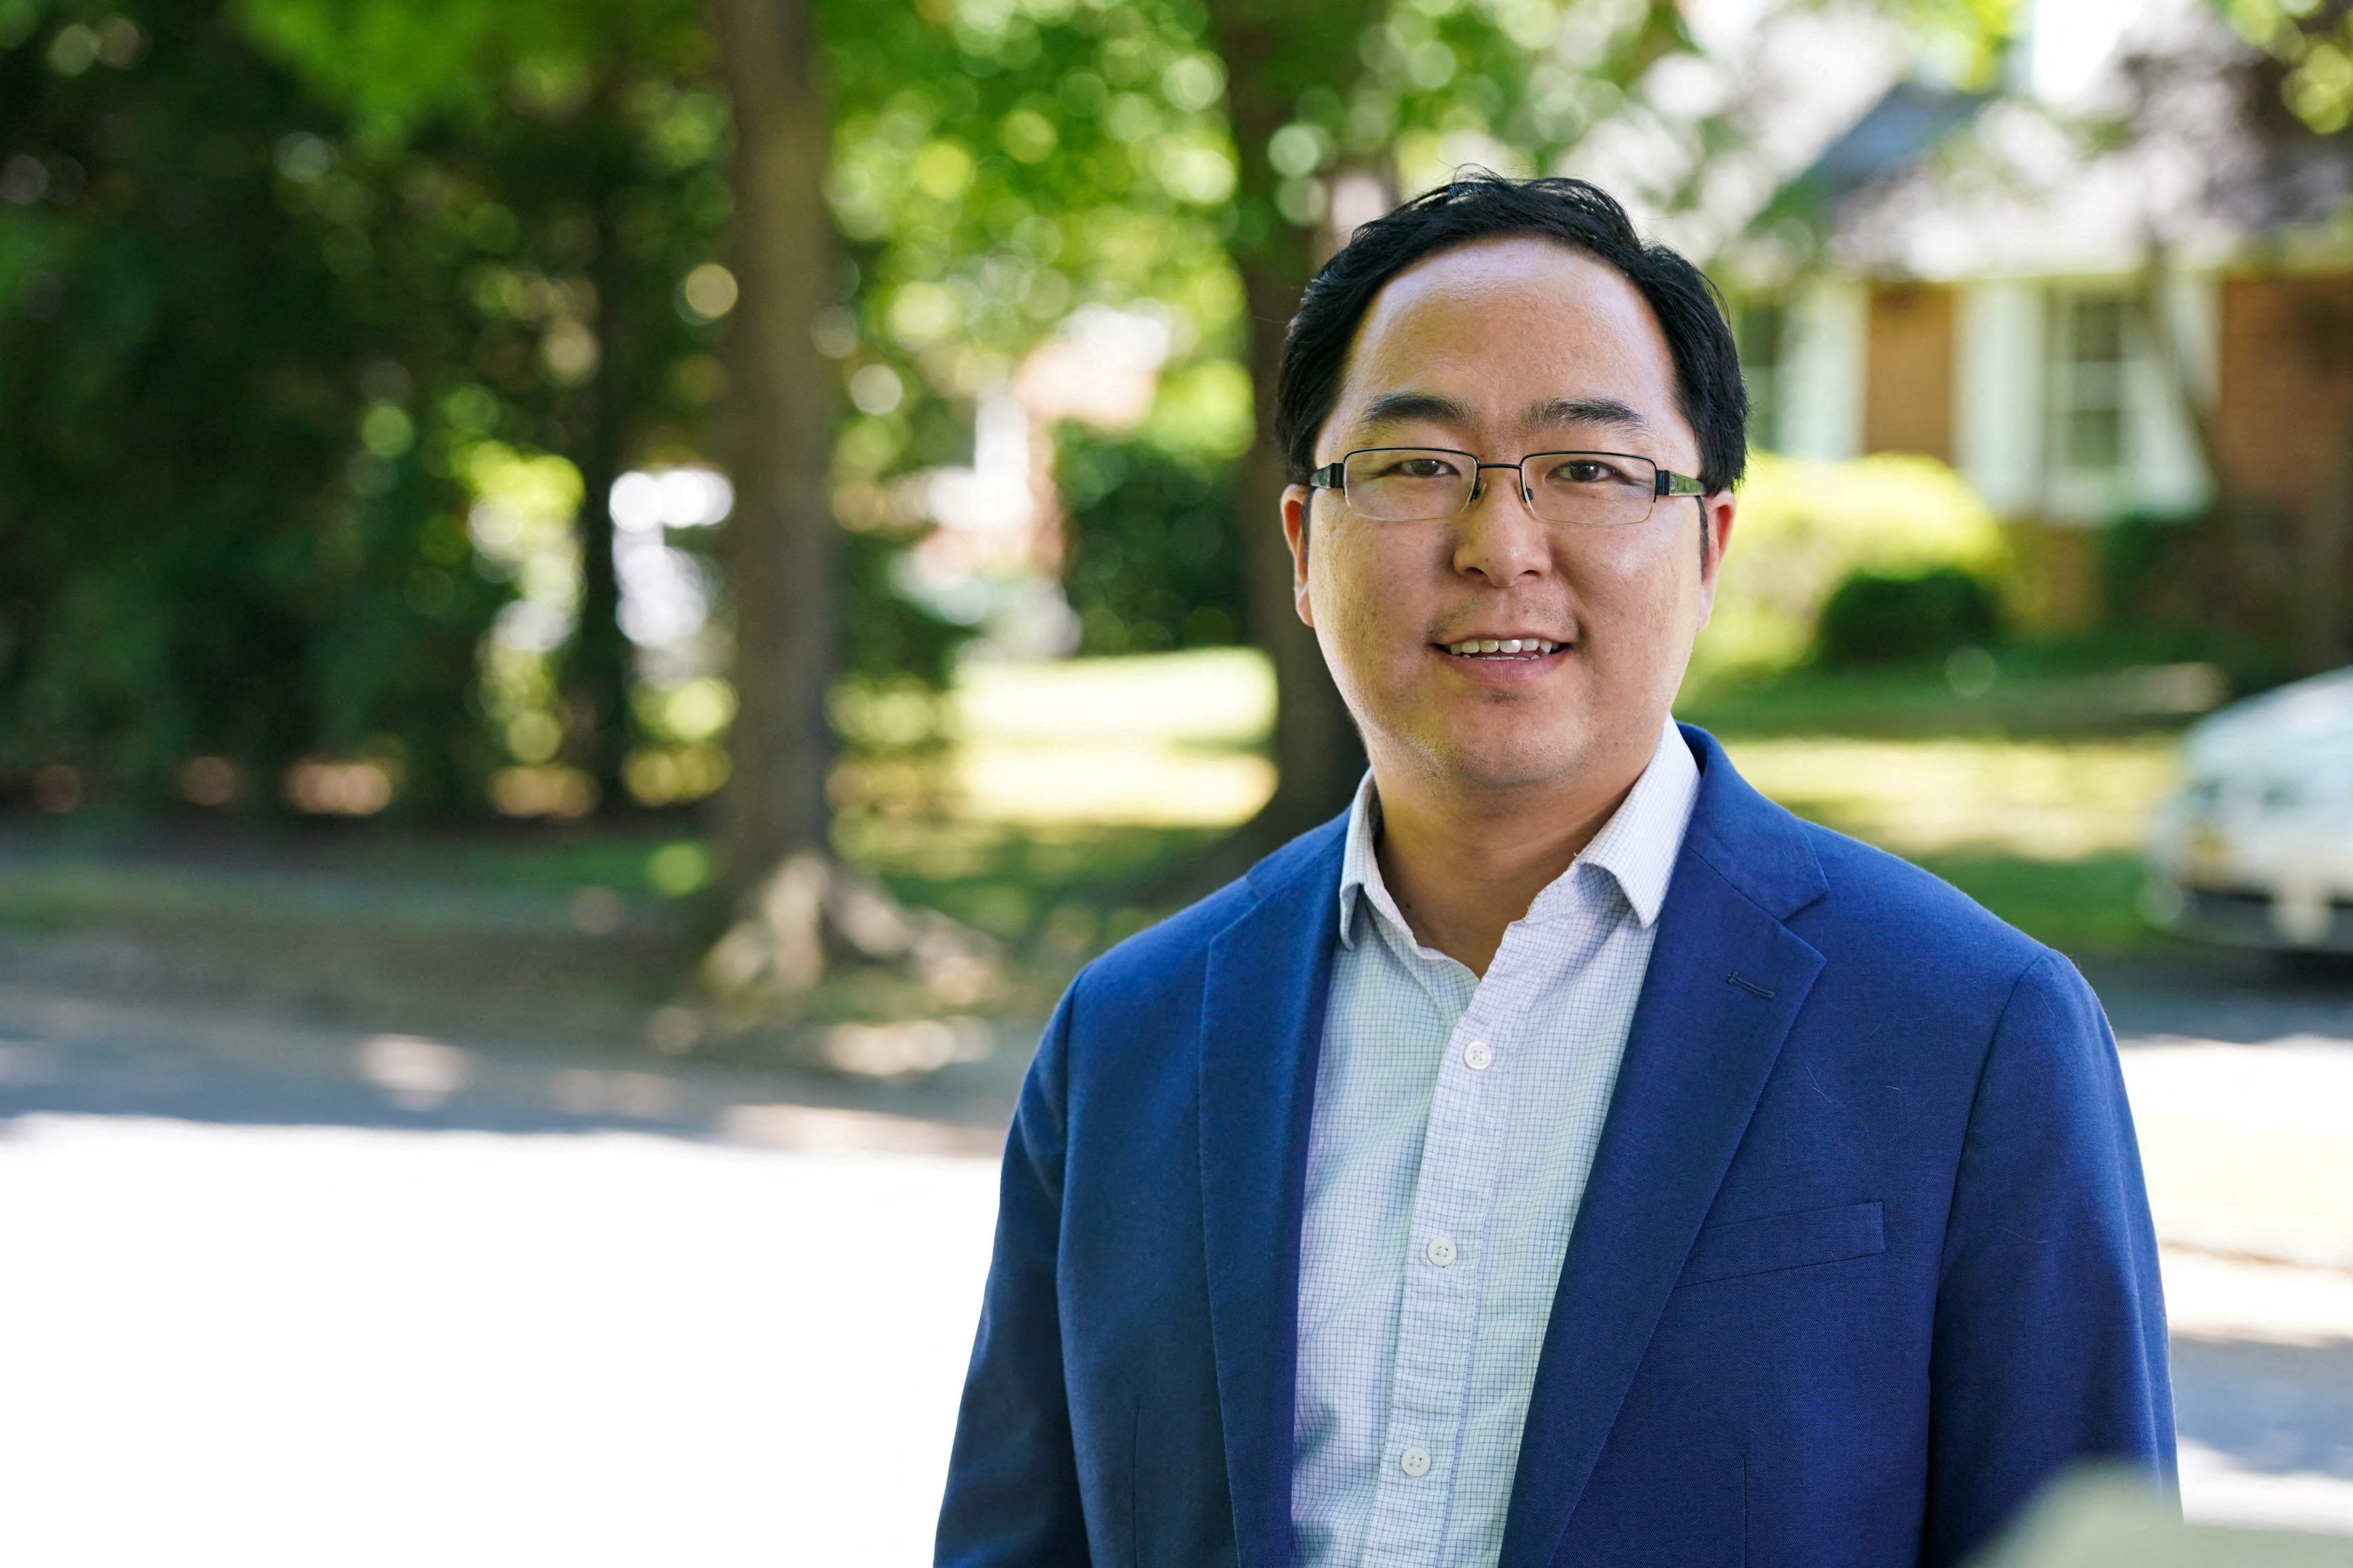 Democratic candidate for the U.S. House of Representatives Andrew Kim of New Jersey